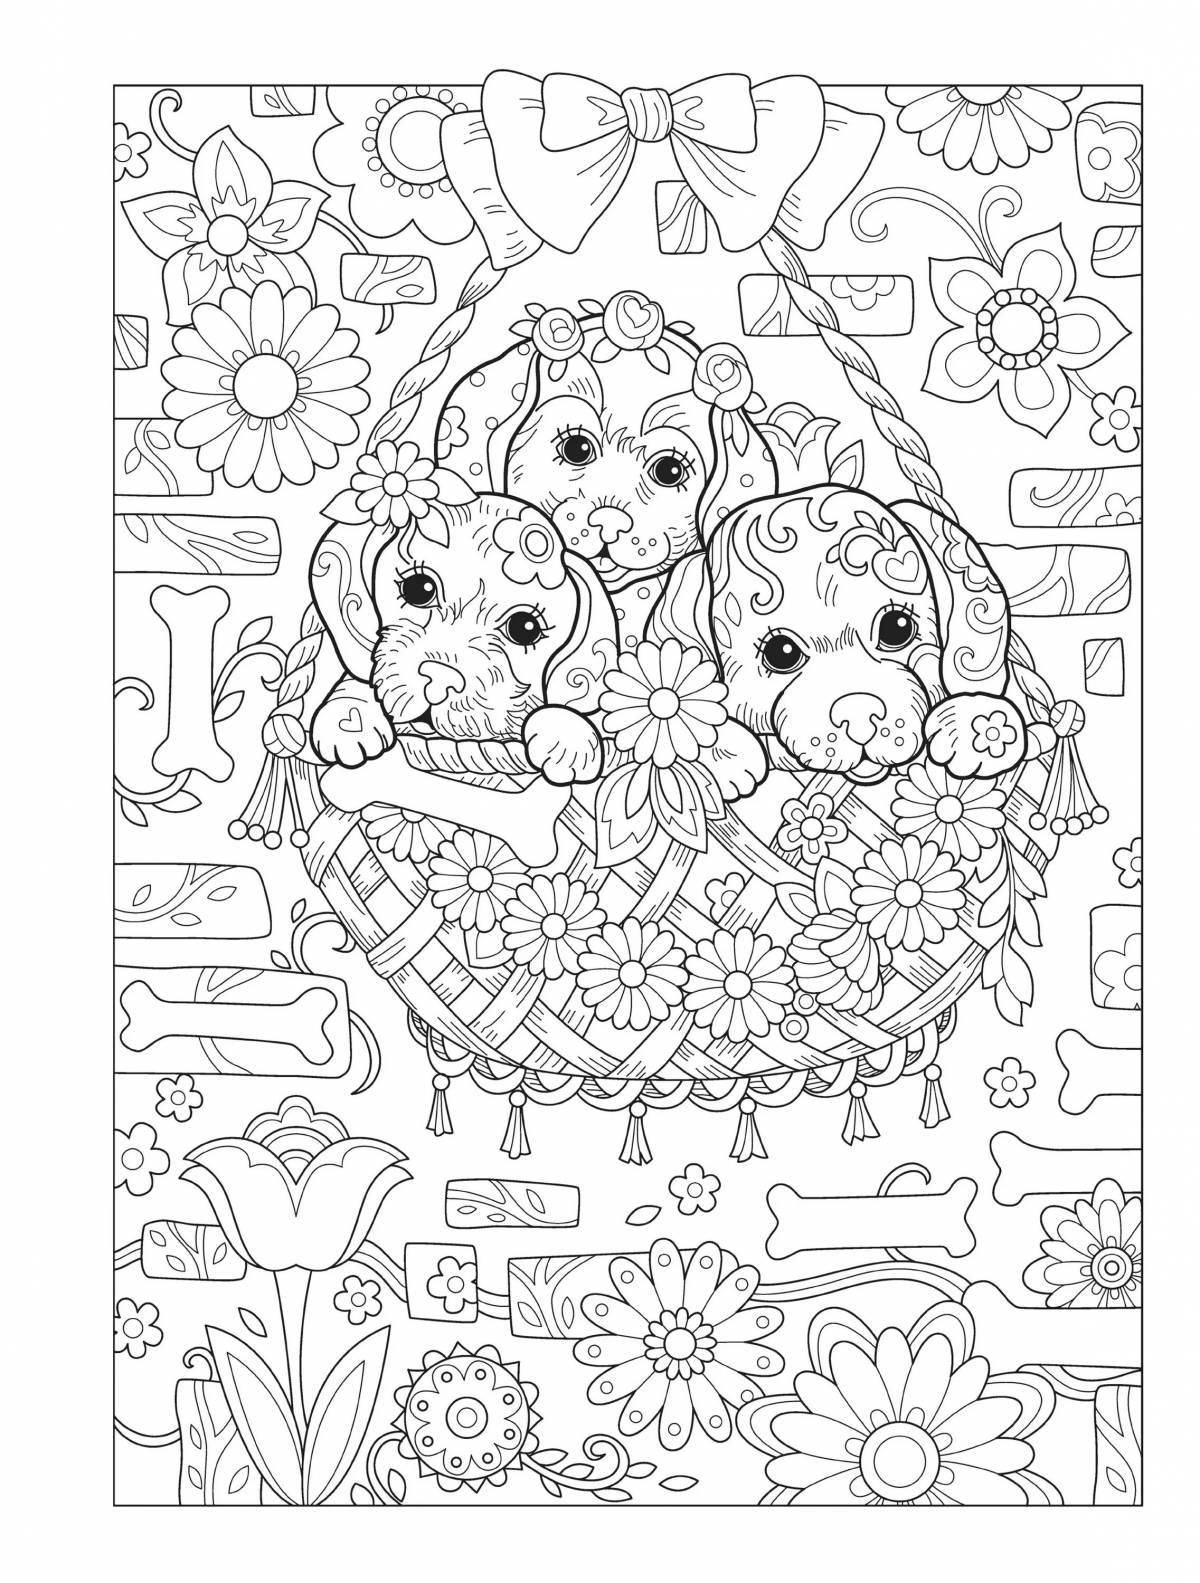 Color-extraordinary antistress coloring page for 10 year olds